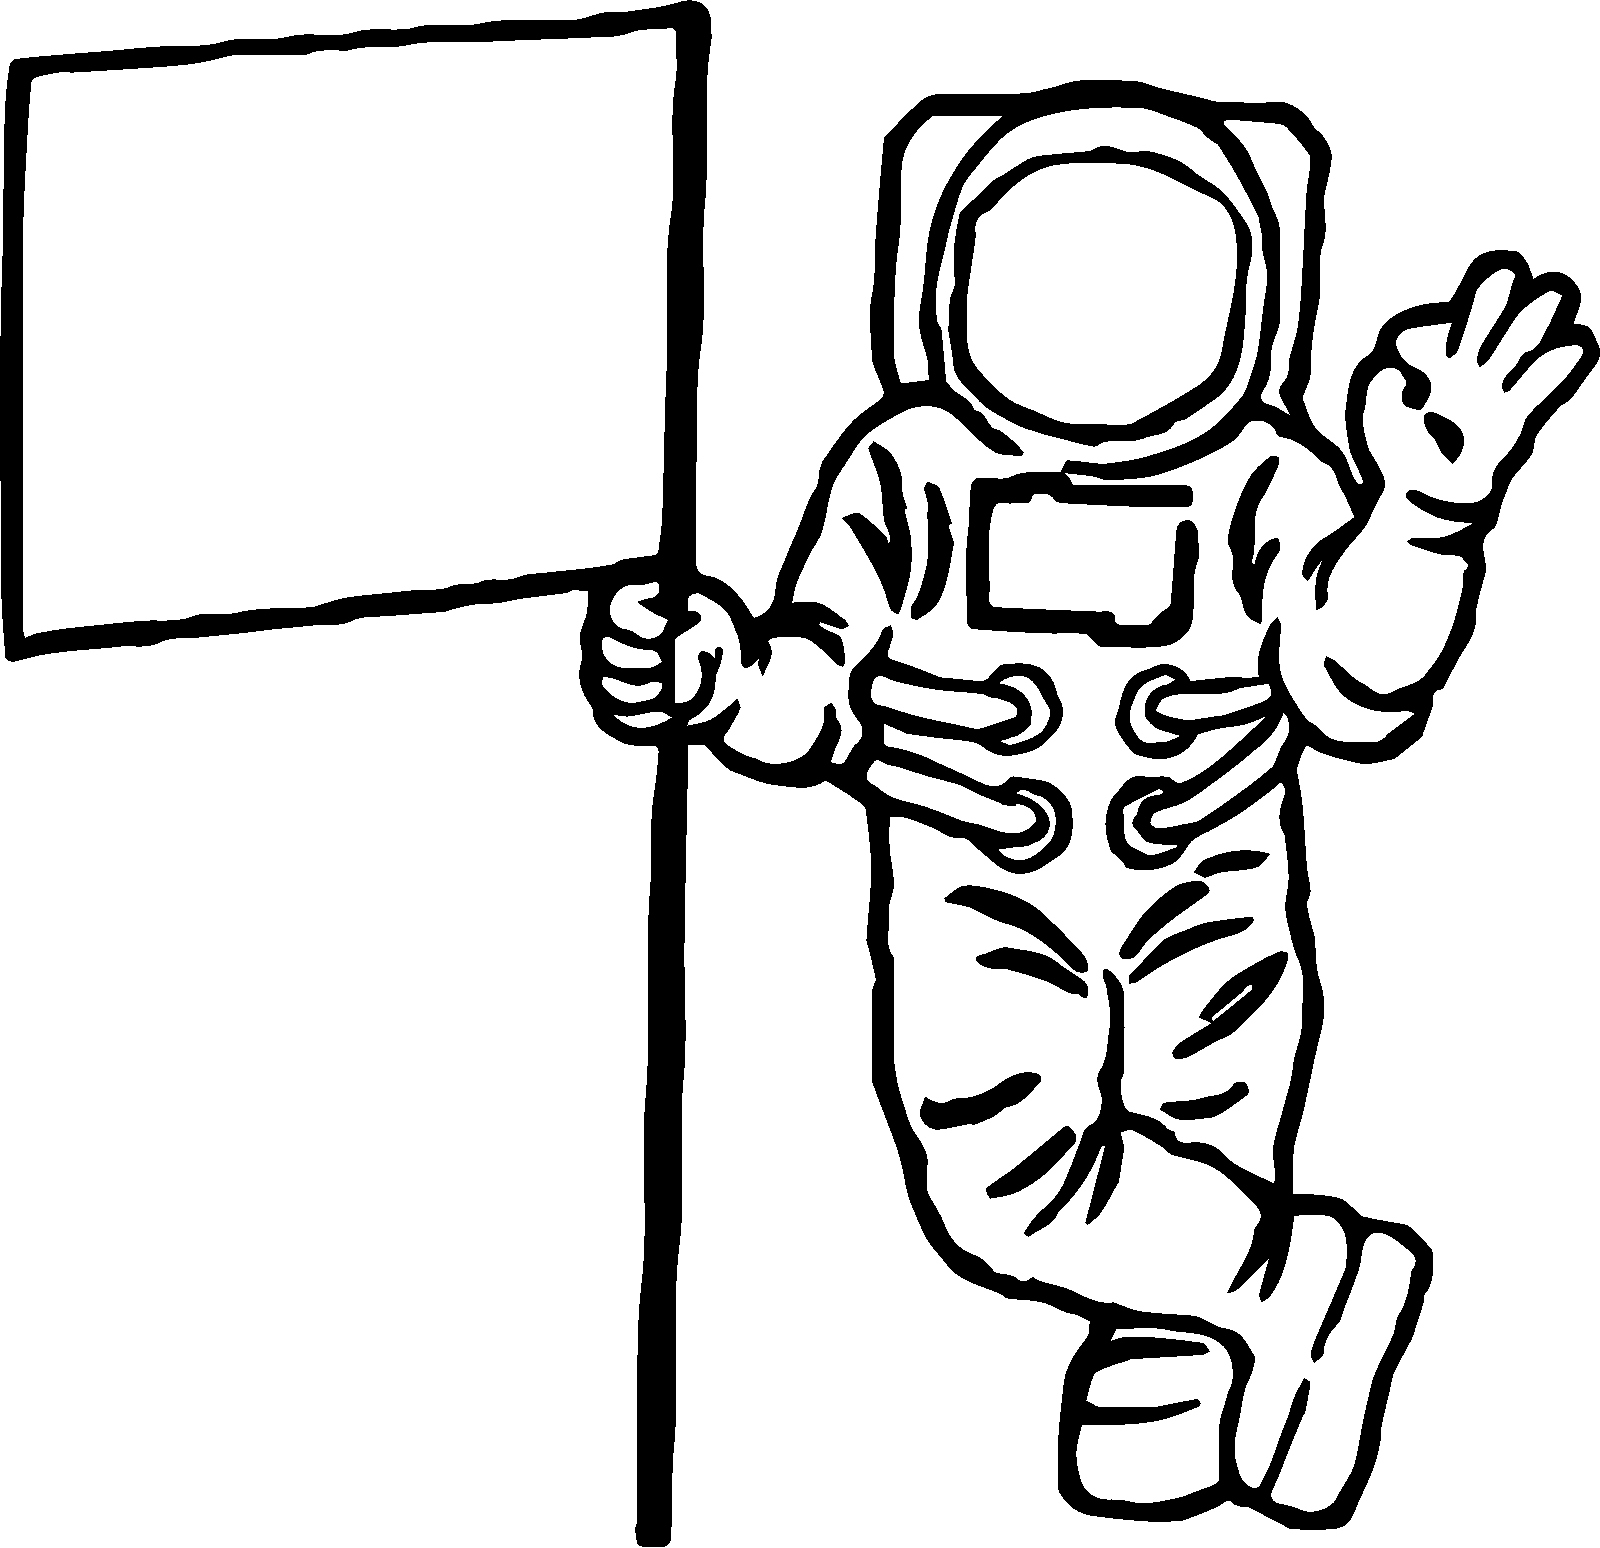 Astronaut Clipart Black And White.